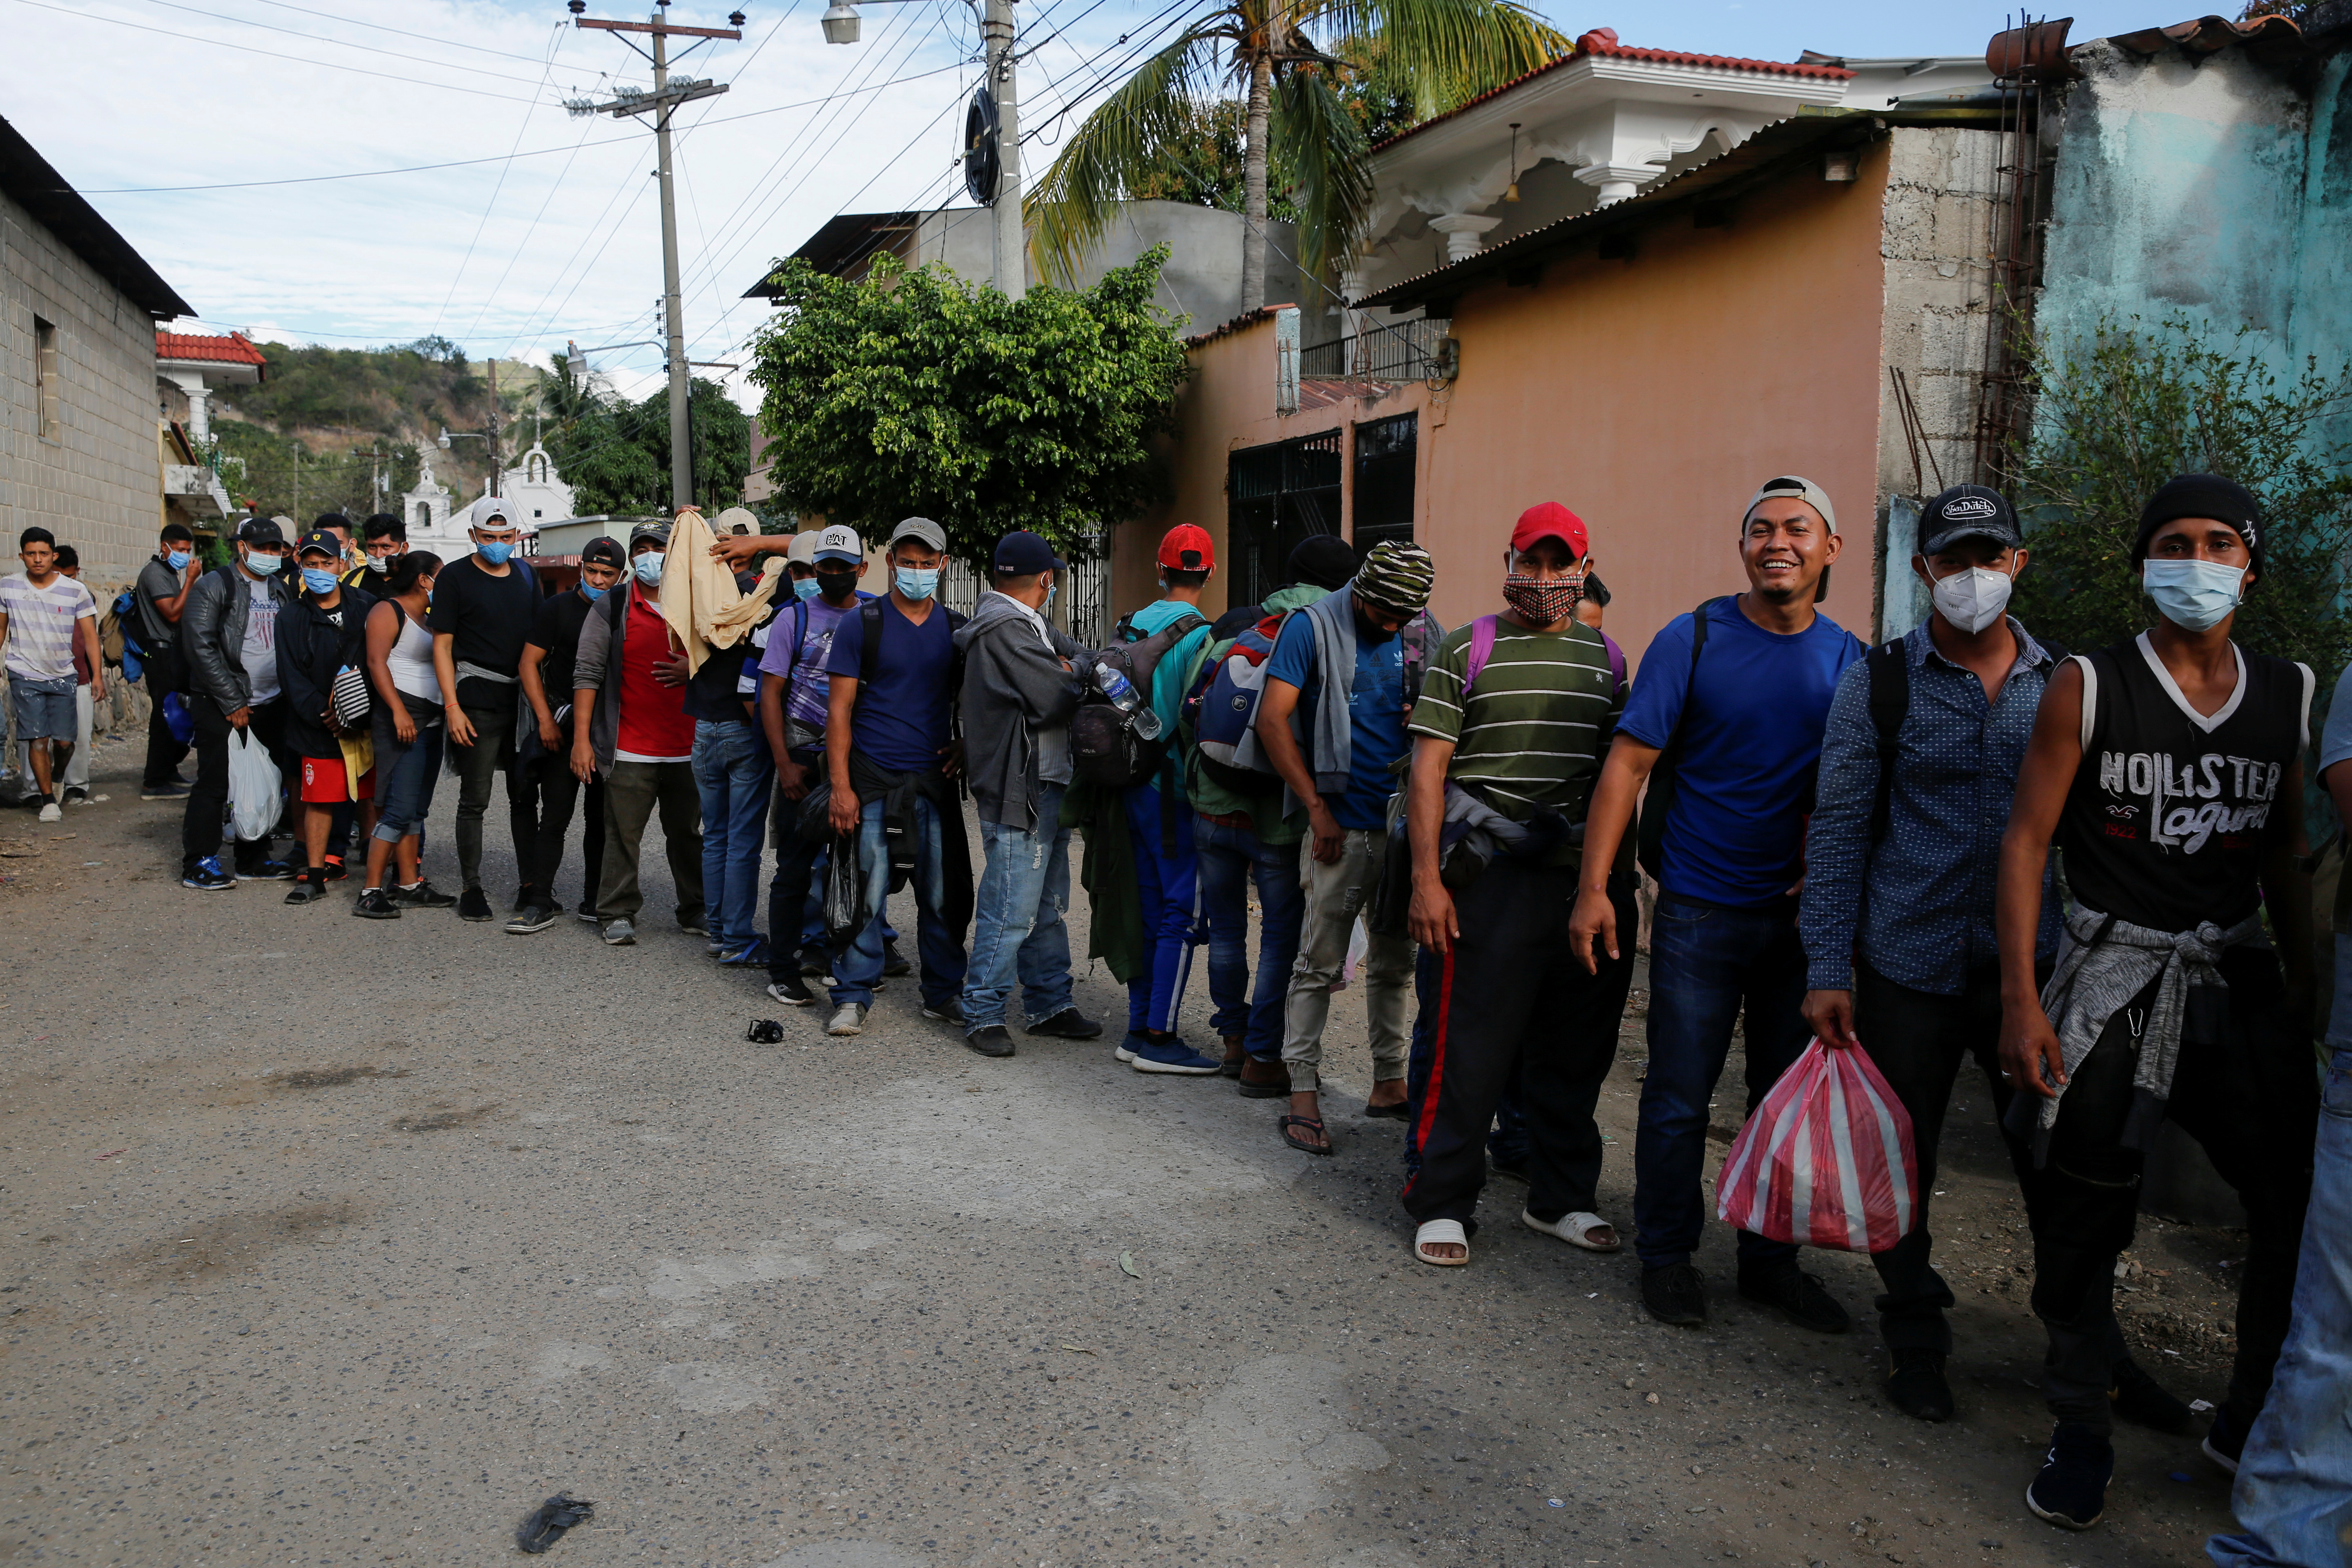 Hondurans take part in a new caravan of migrants set to head to the United States